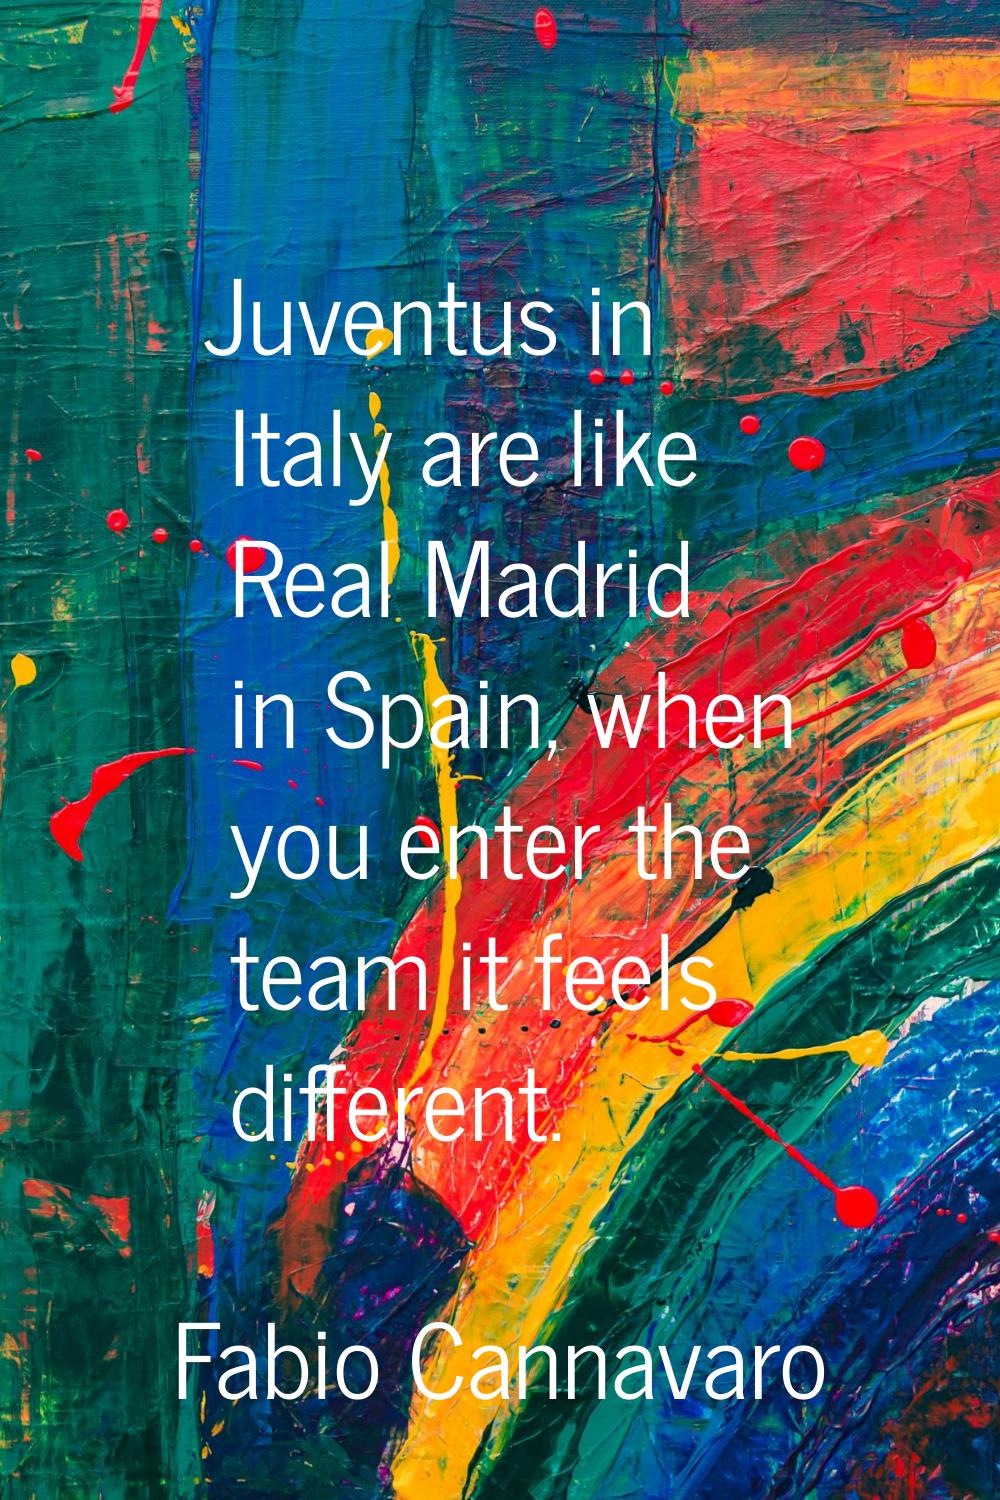 Juventus in Italy are like Real Madrid in Spain, when you enter the team it feels different.